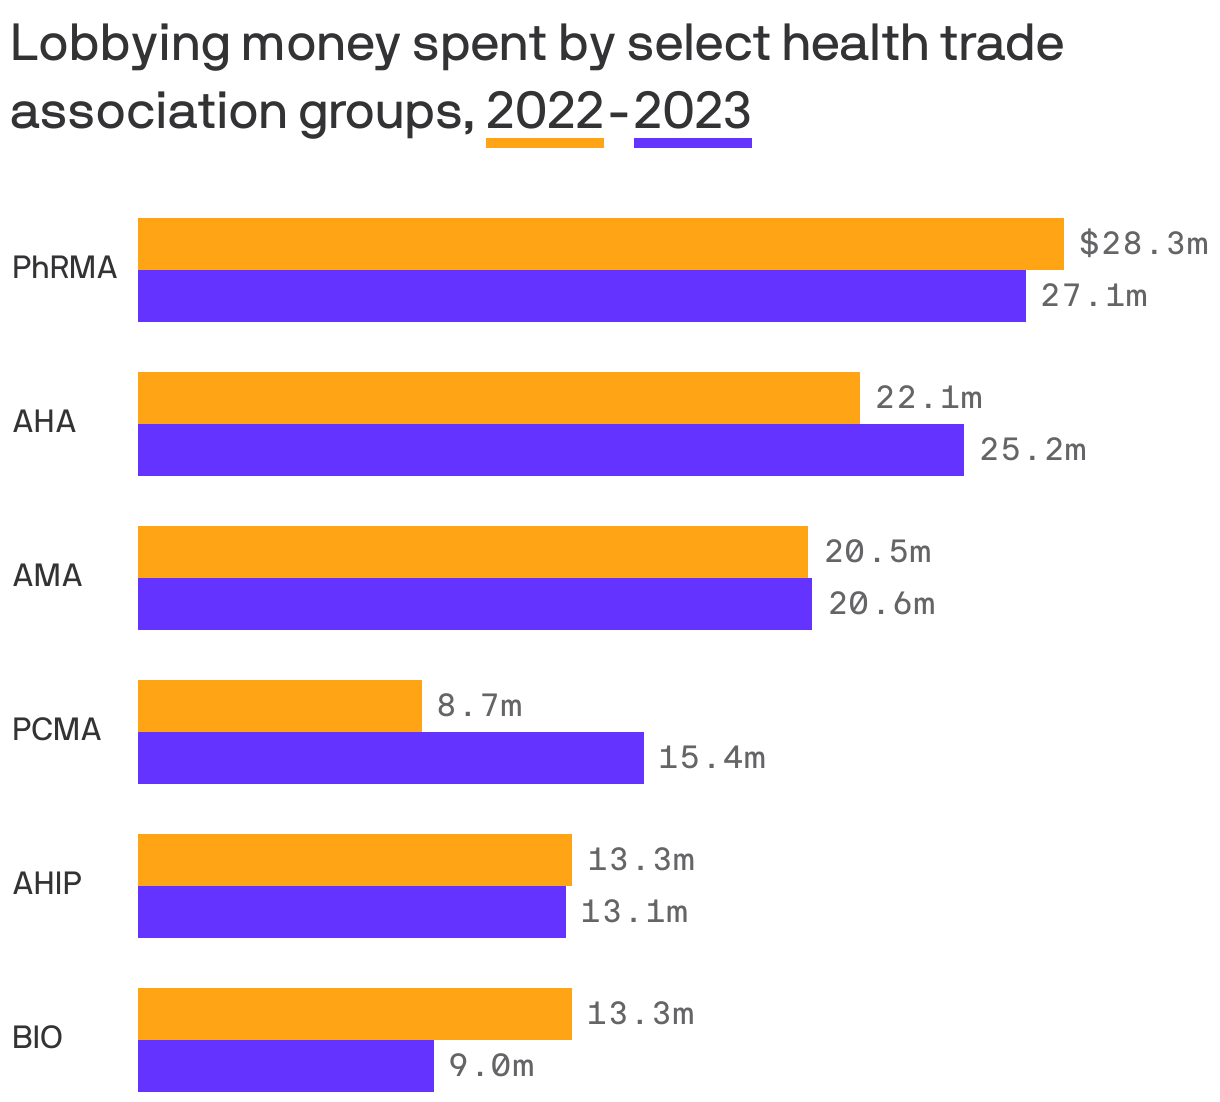 Lobbying money spent by select health trade association groups, <span style="border-bottom: 5px solid #ffa515">2022</span>-<span style="border-bottom: 5px solid #6533ff">2023</span>